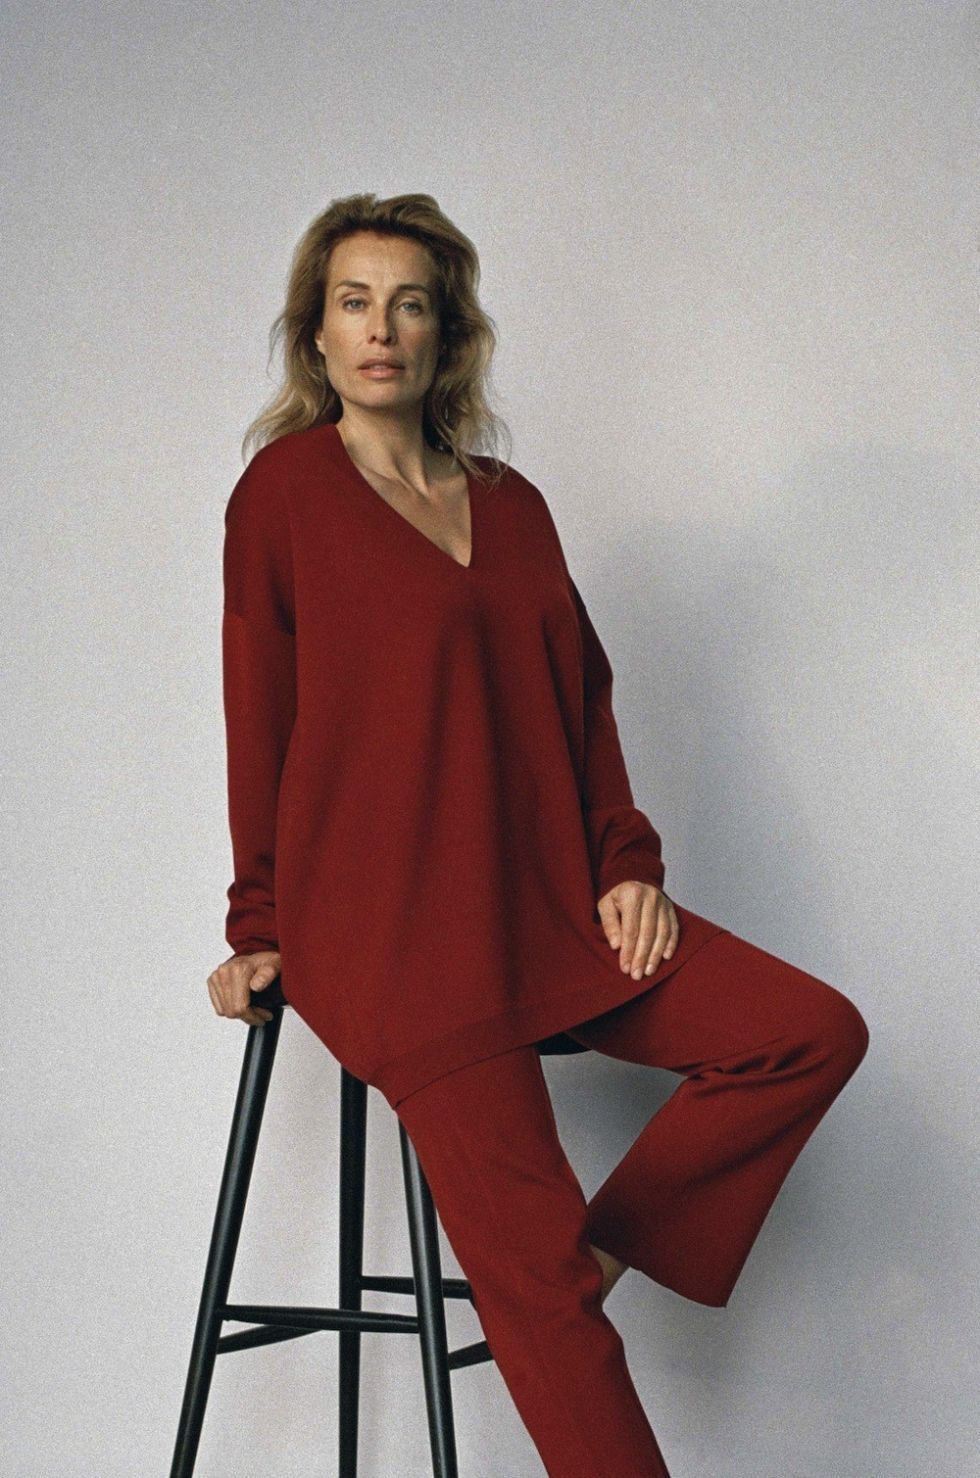 Sleeve, Shoulder, Joint, Standing, Sitting, Fashion, Knee, Maroon, Stool, Vintage clothing, 